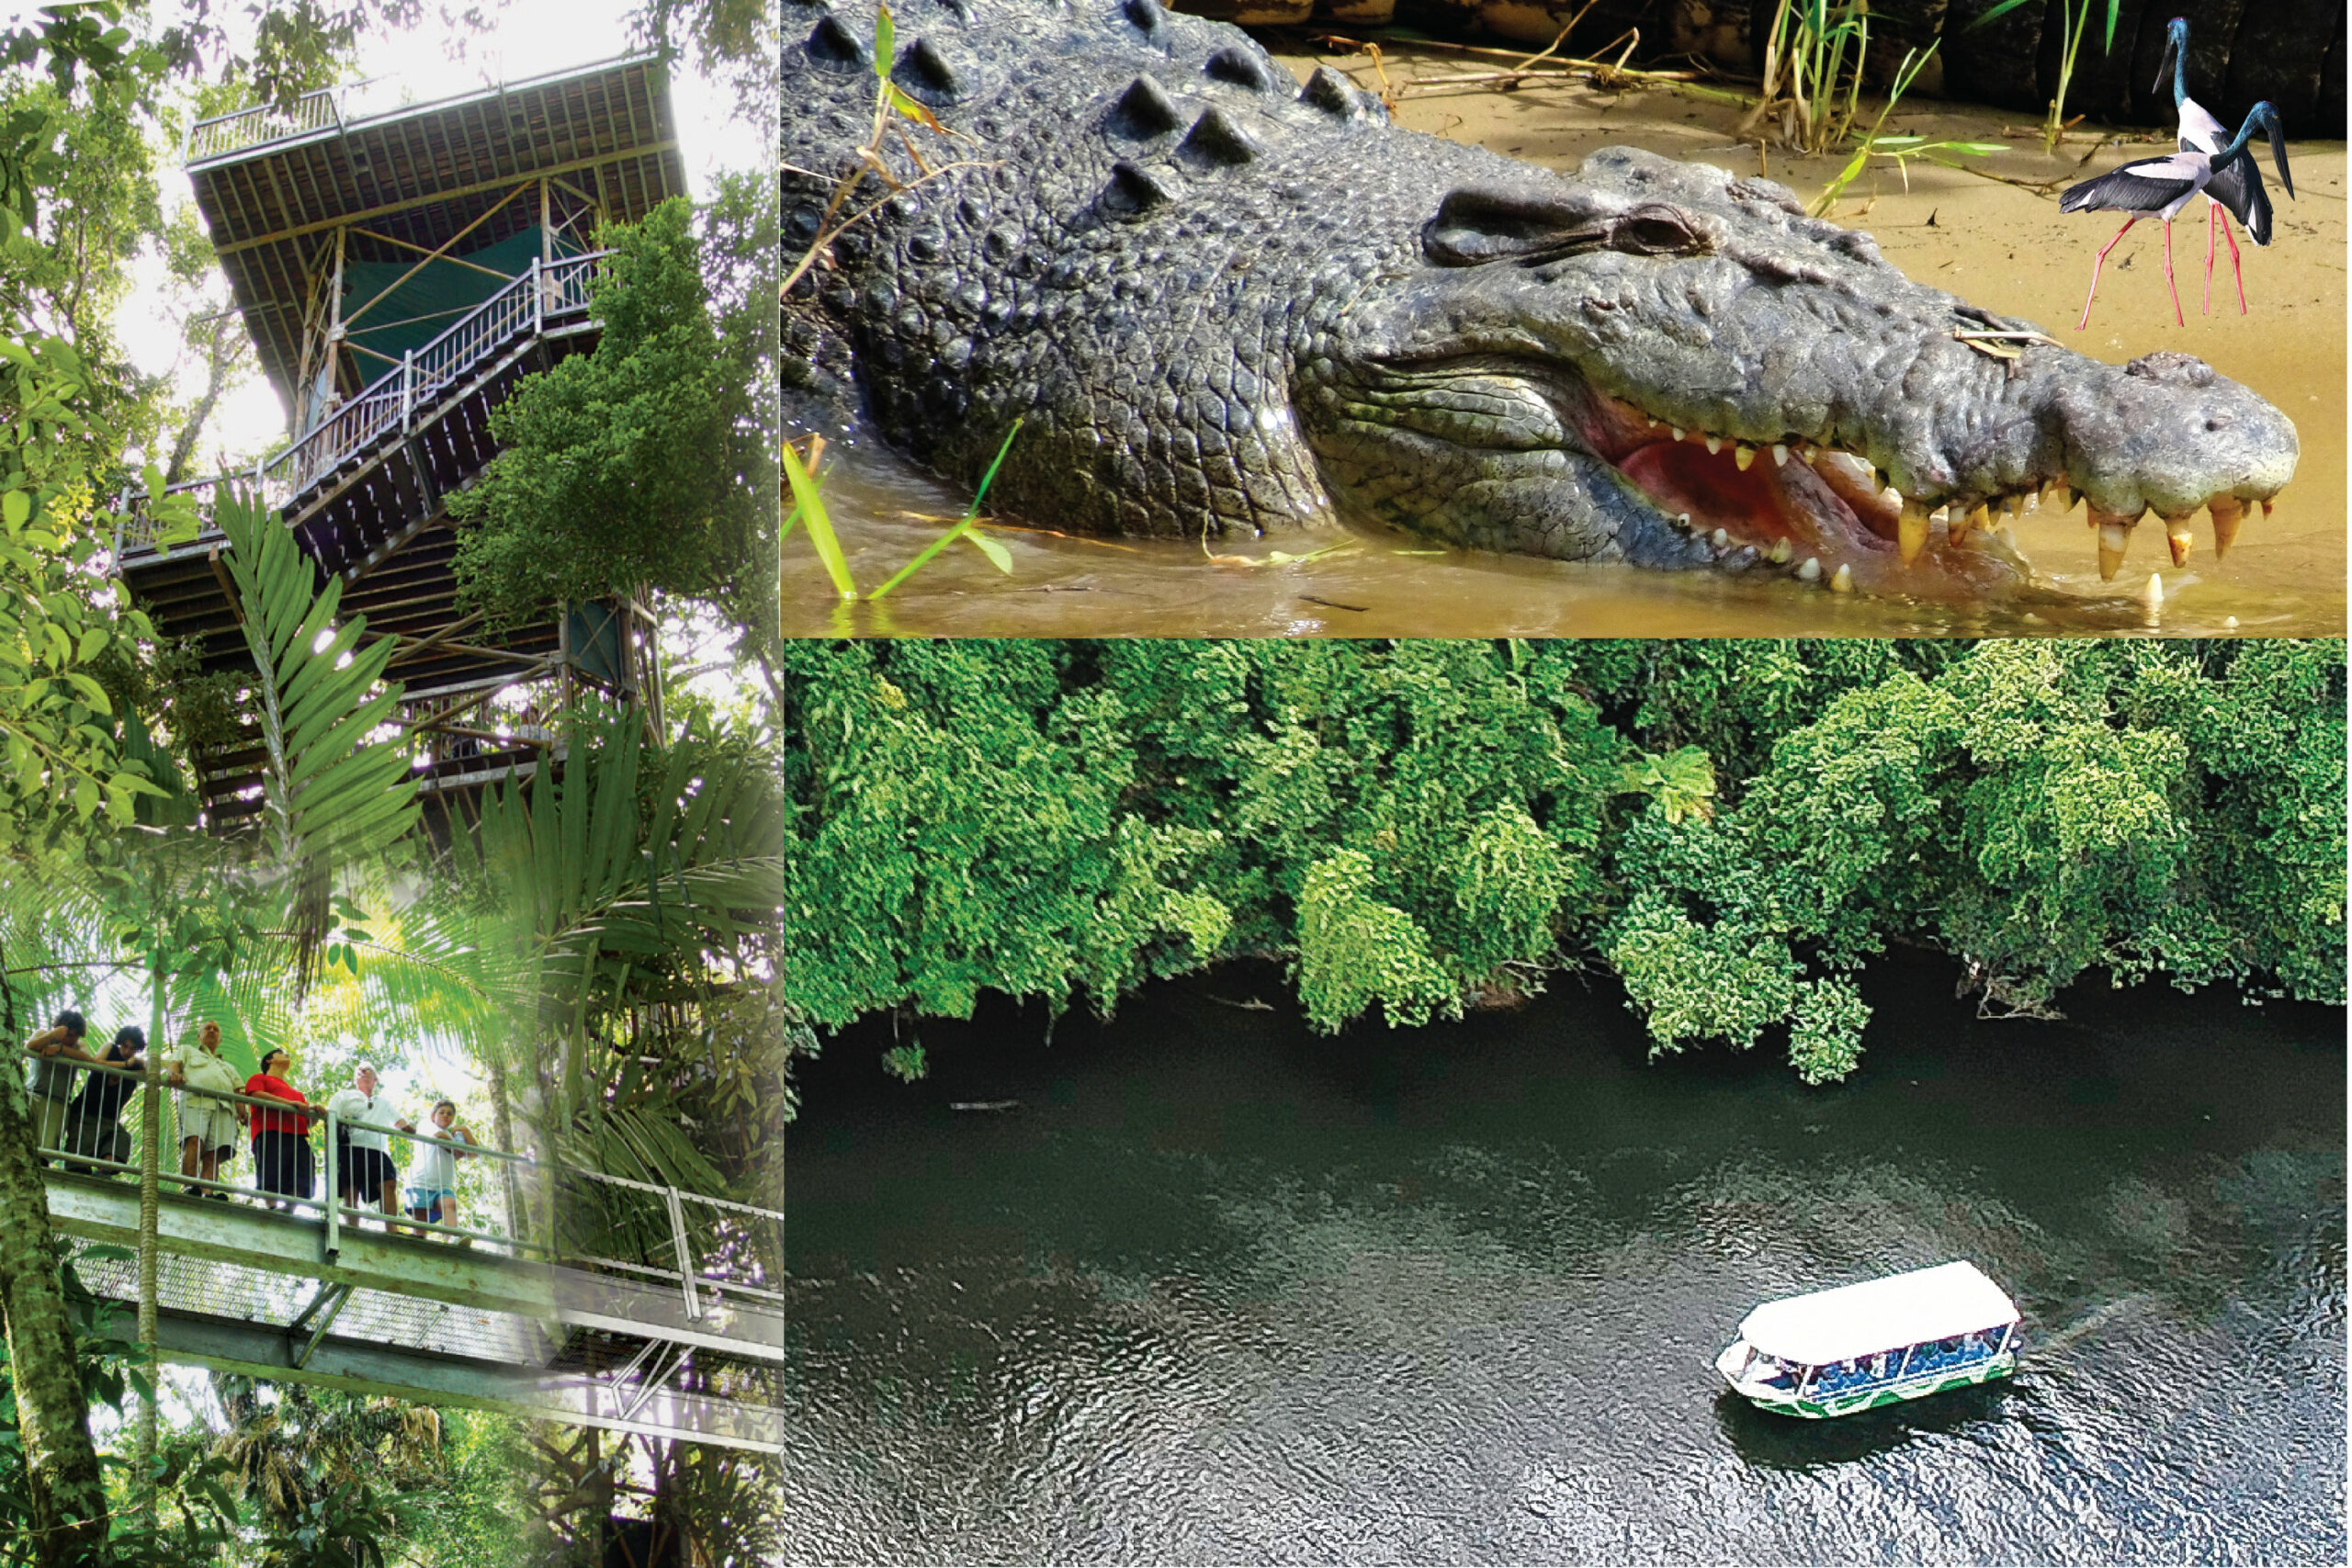 Crocodile Express Daintree River Cruise Daintree Village & Daintree Discovery Centre Unlimited Pass